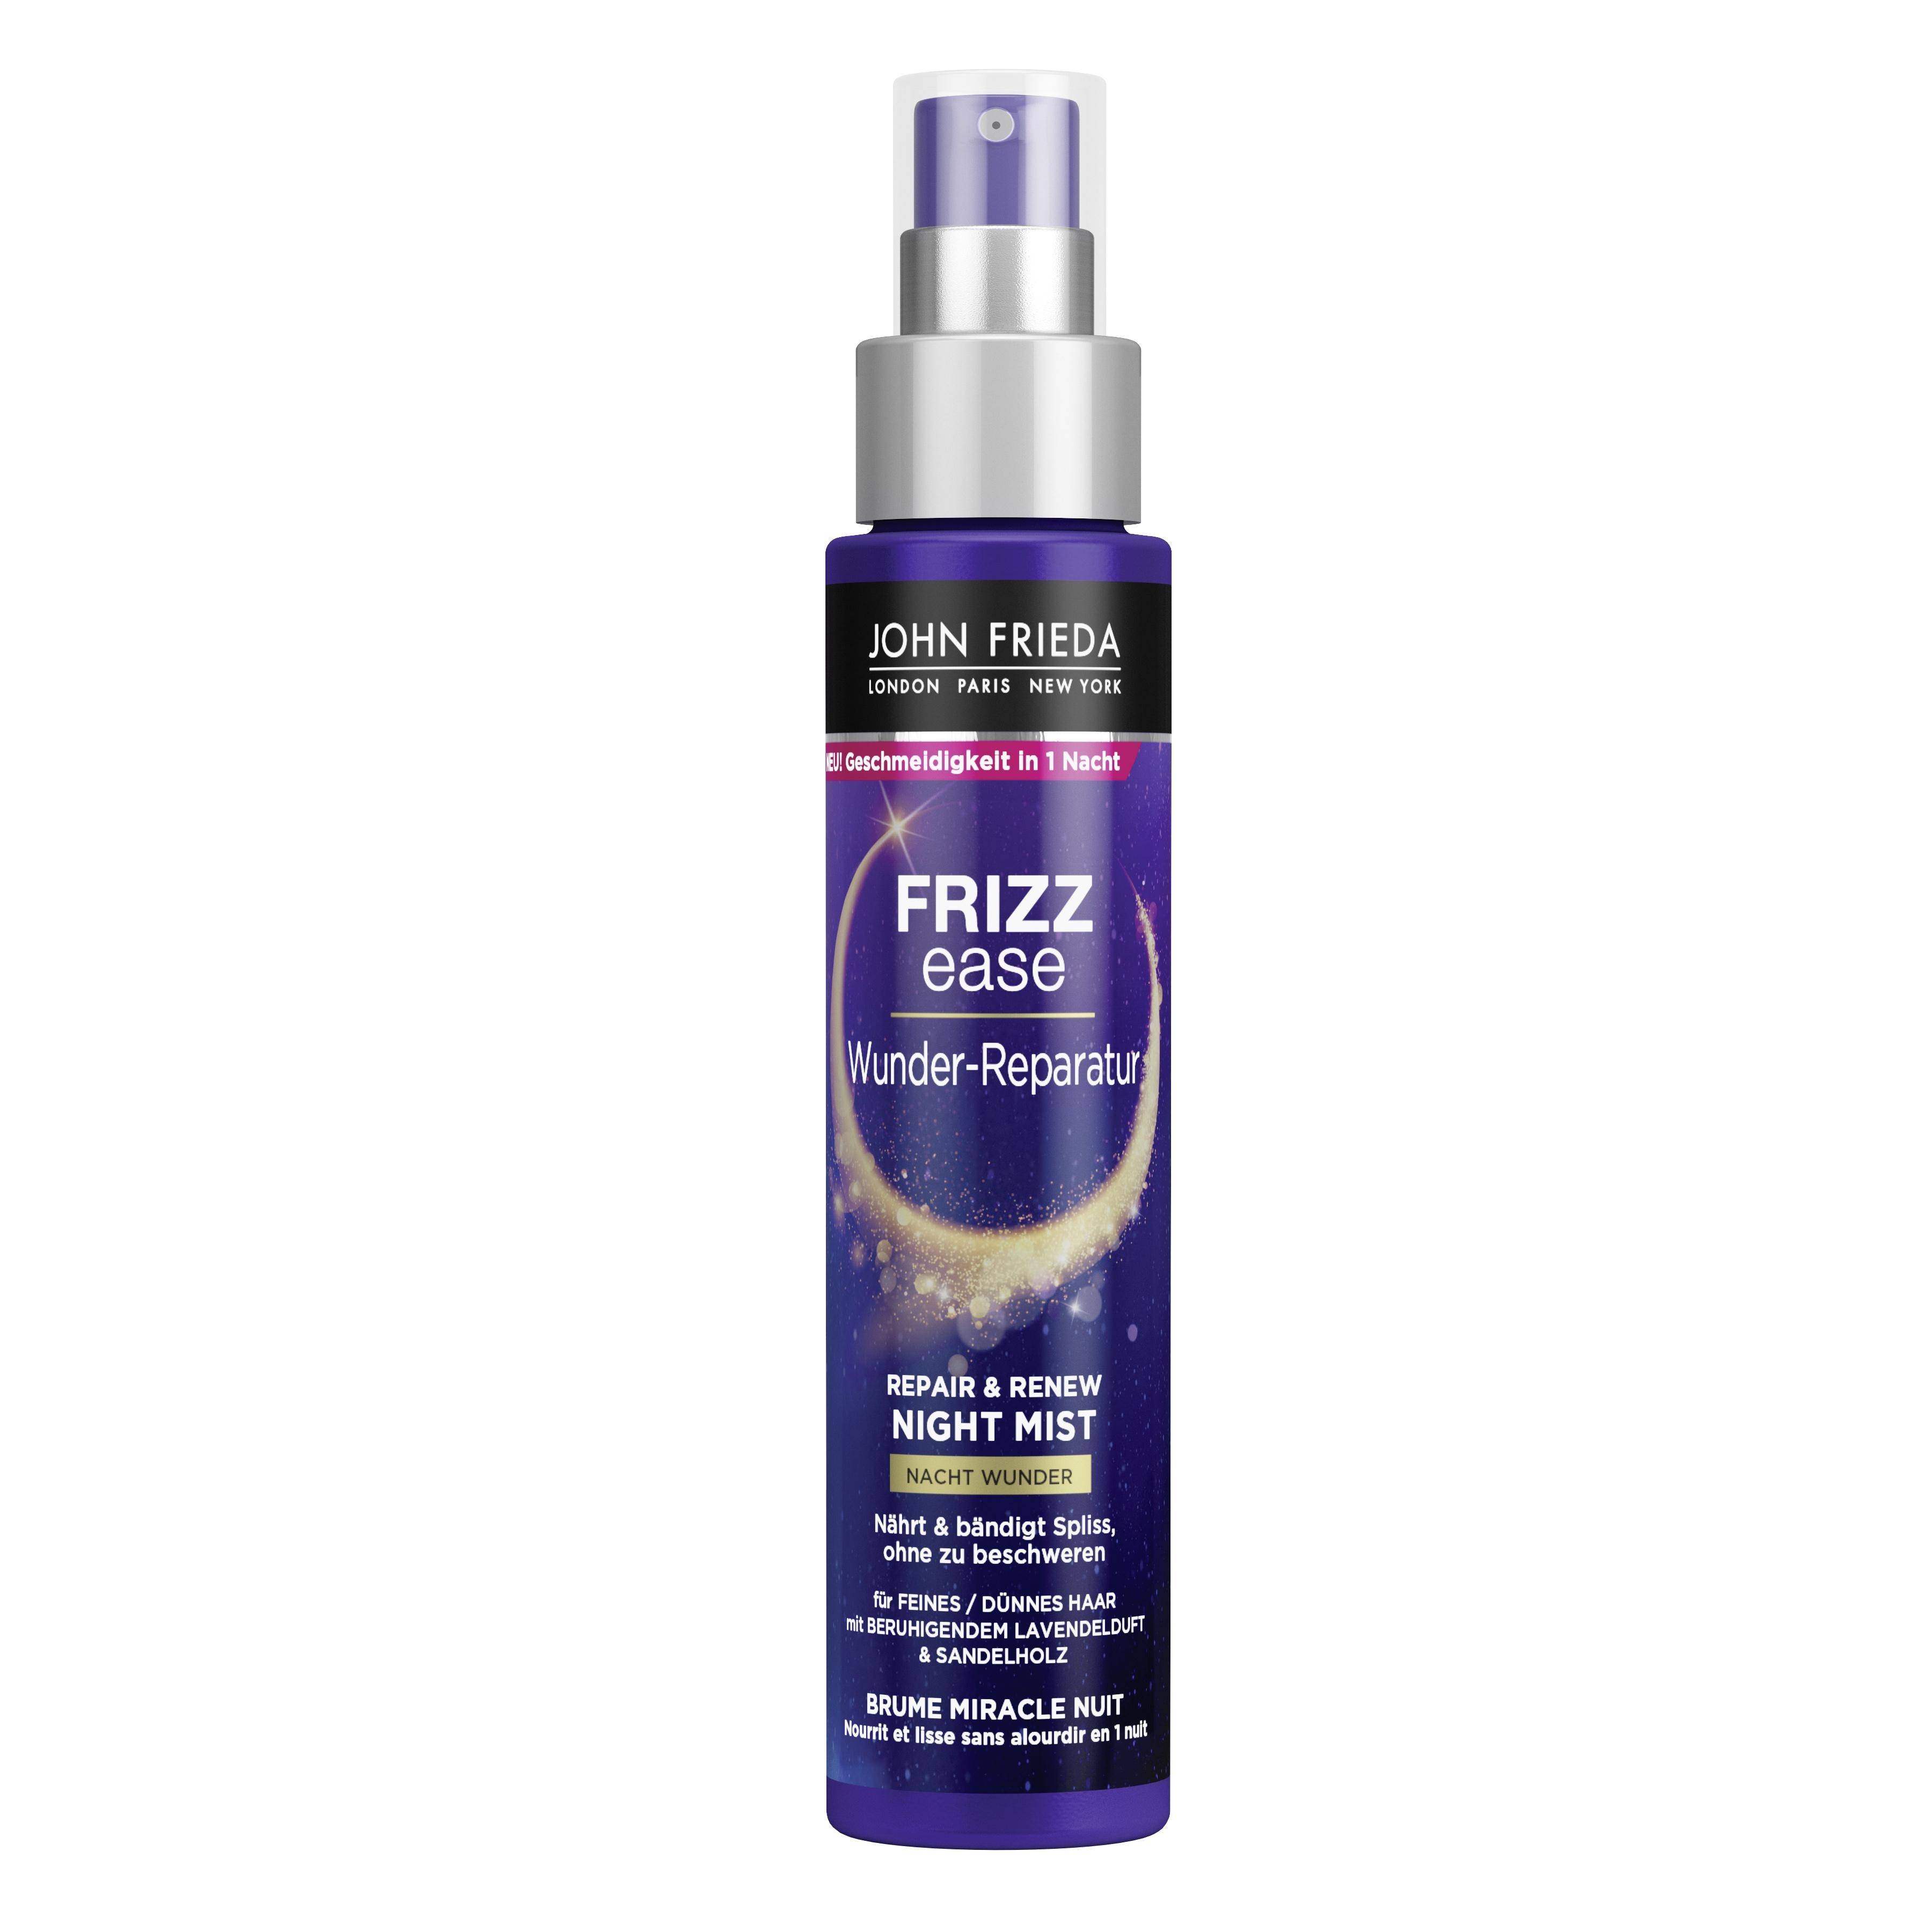 Product image from Frizz Ease - Wunder-Reparatur Nacht Wunder Feuchtigkeitsspray